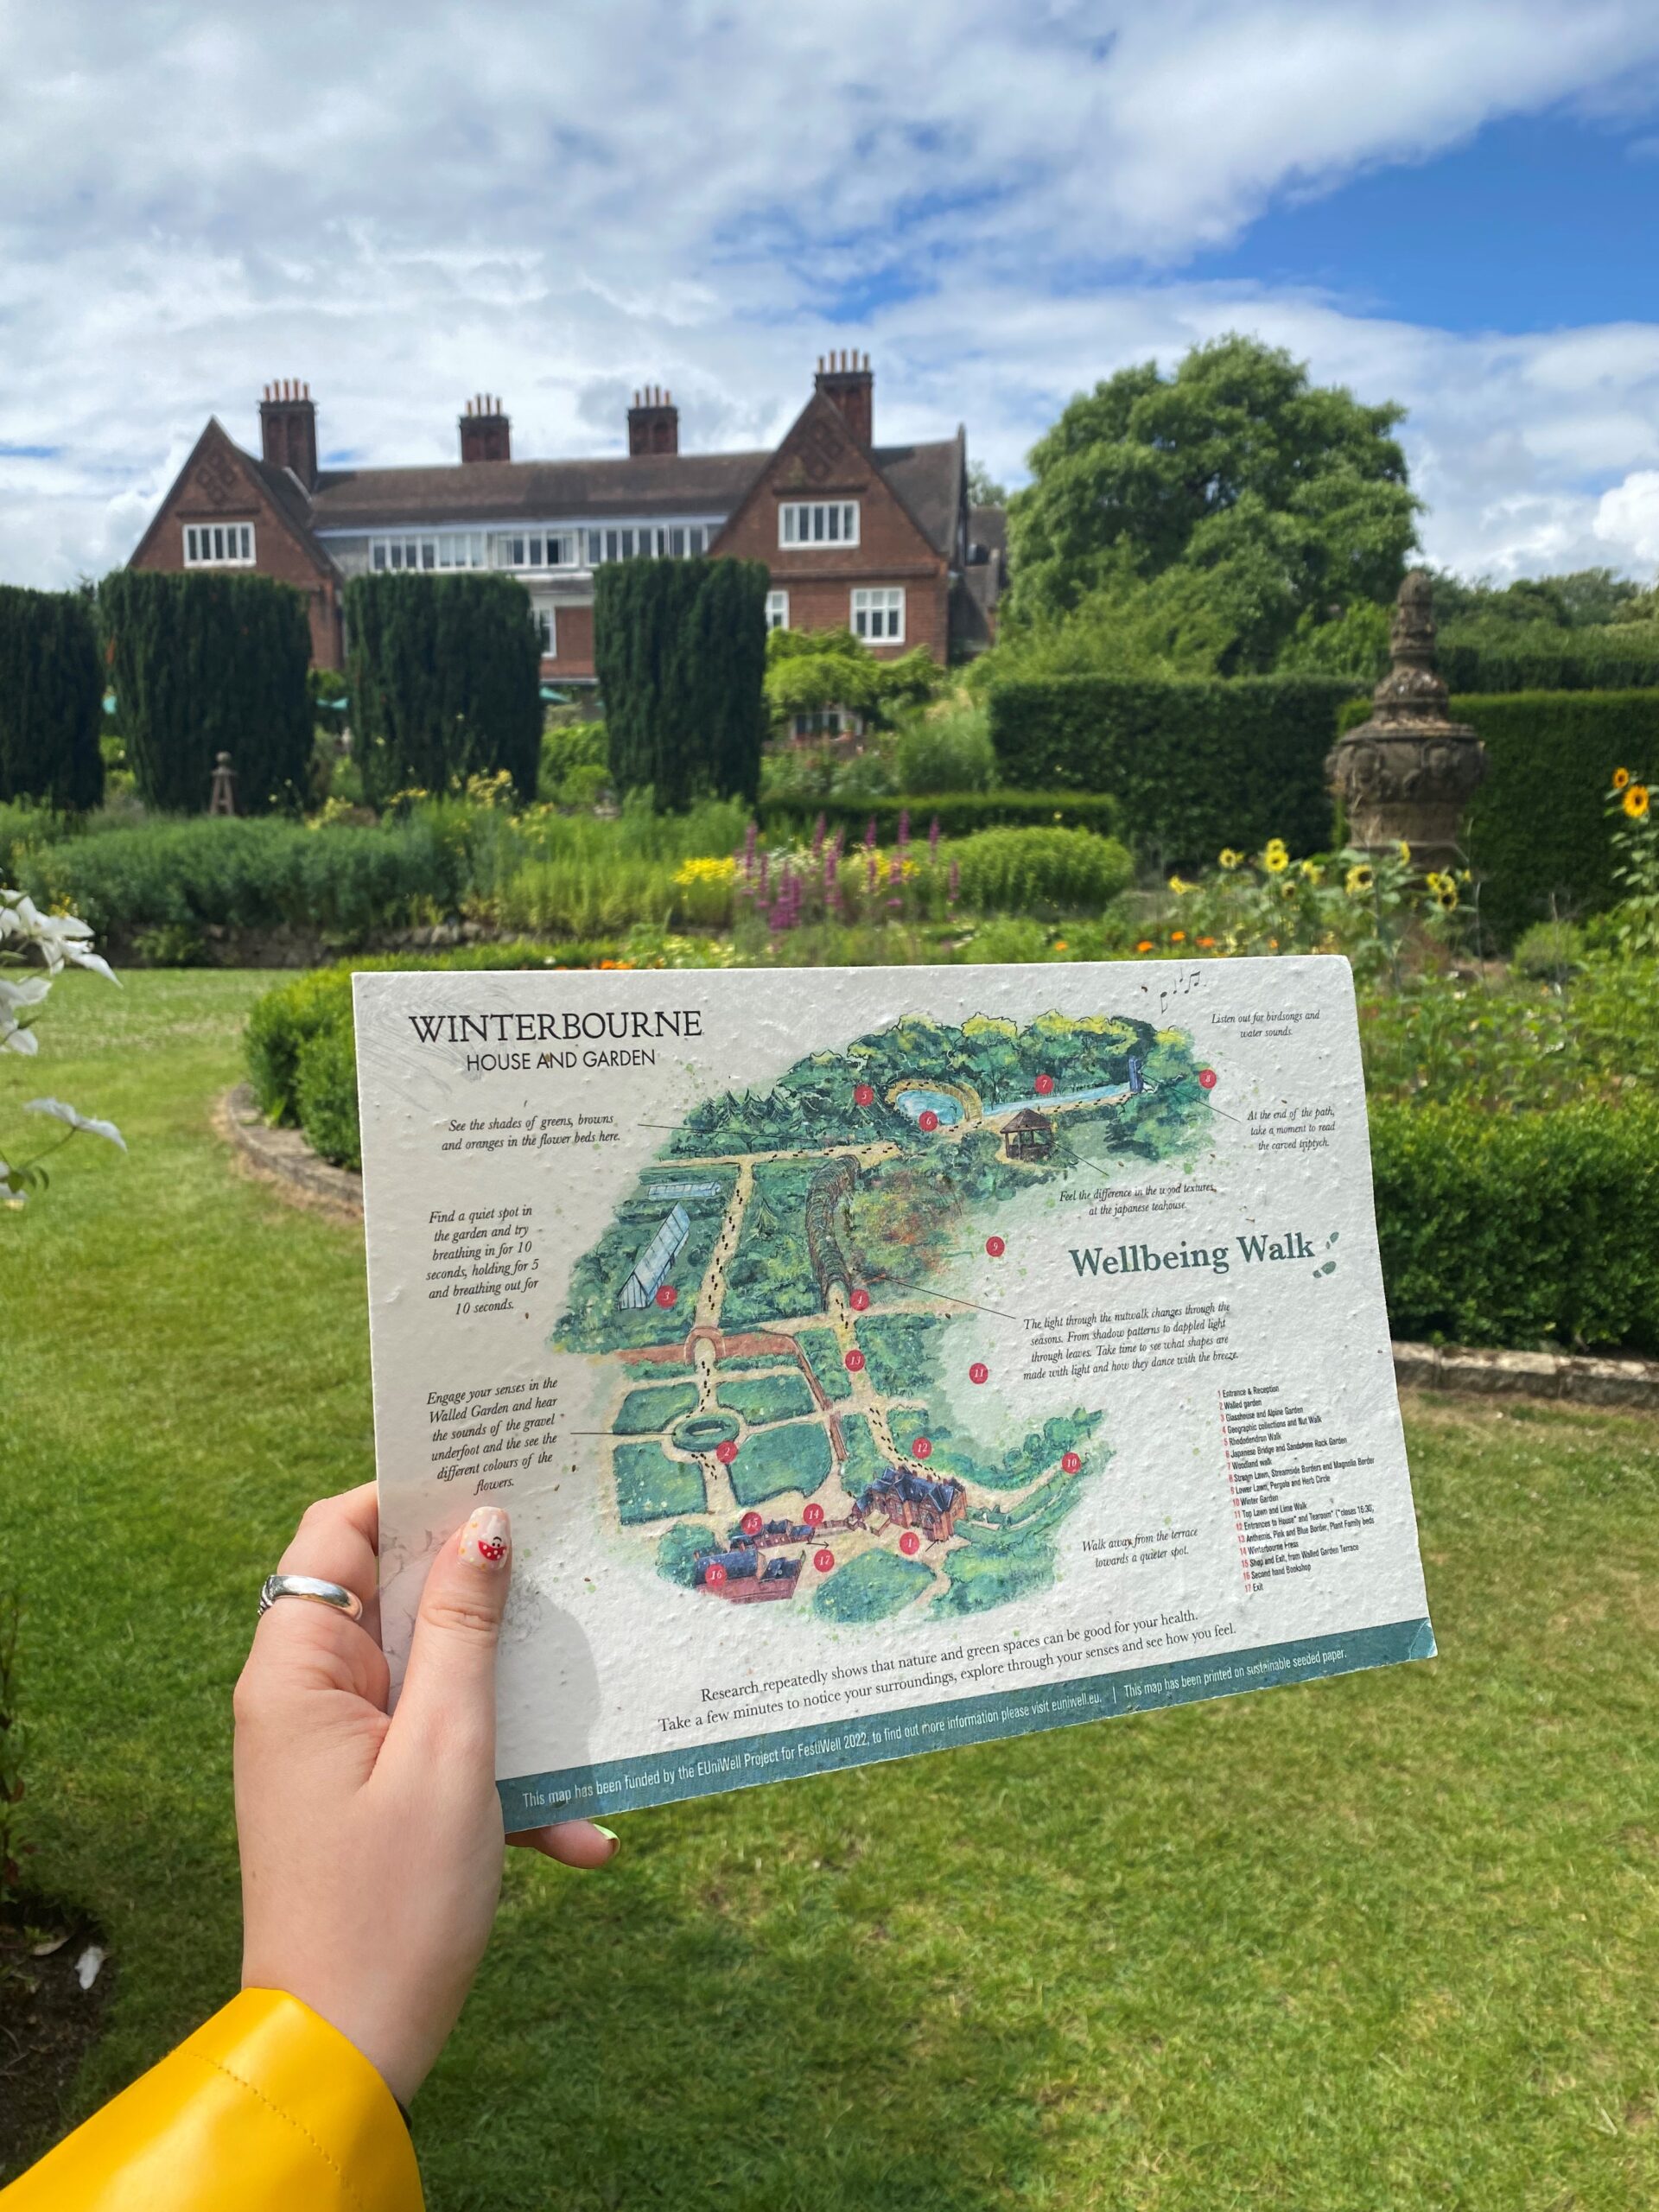 Image of a green illustrated map of Winterbourne House and Gardens